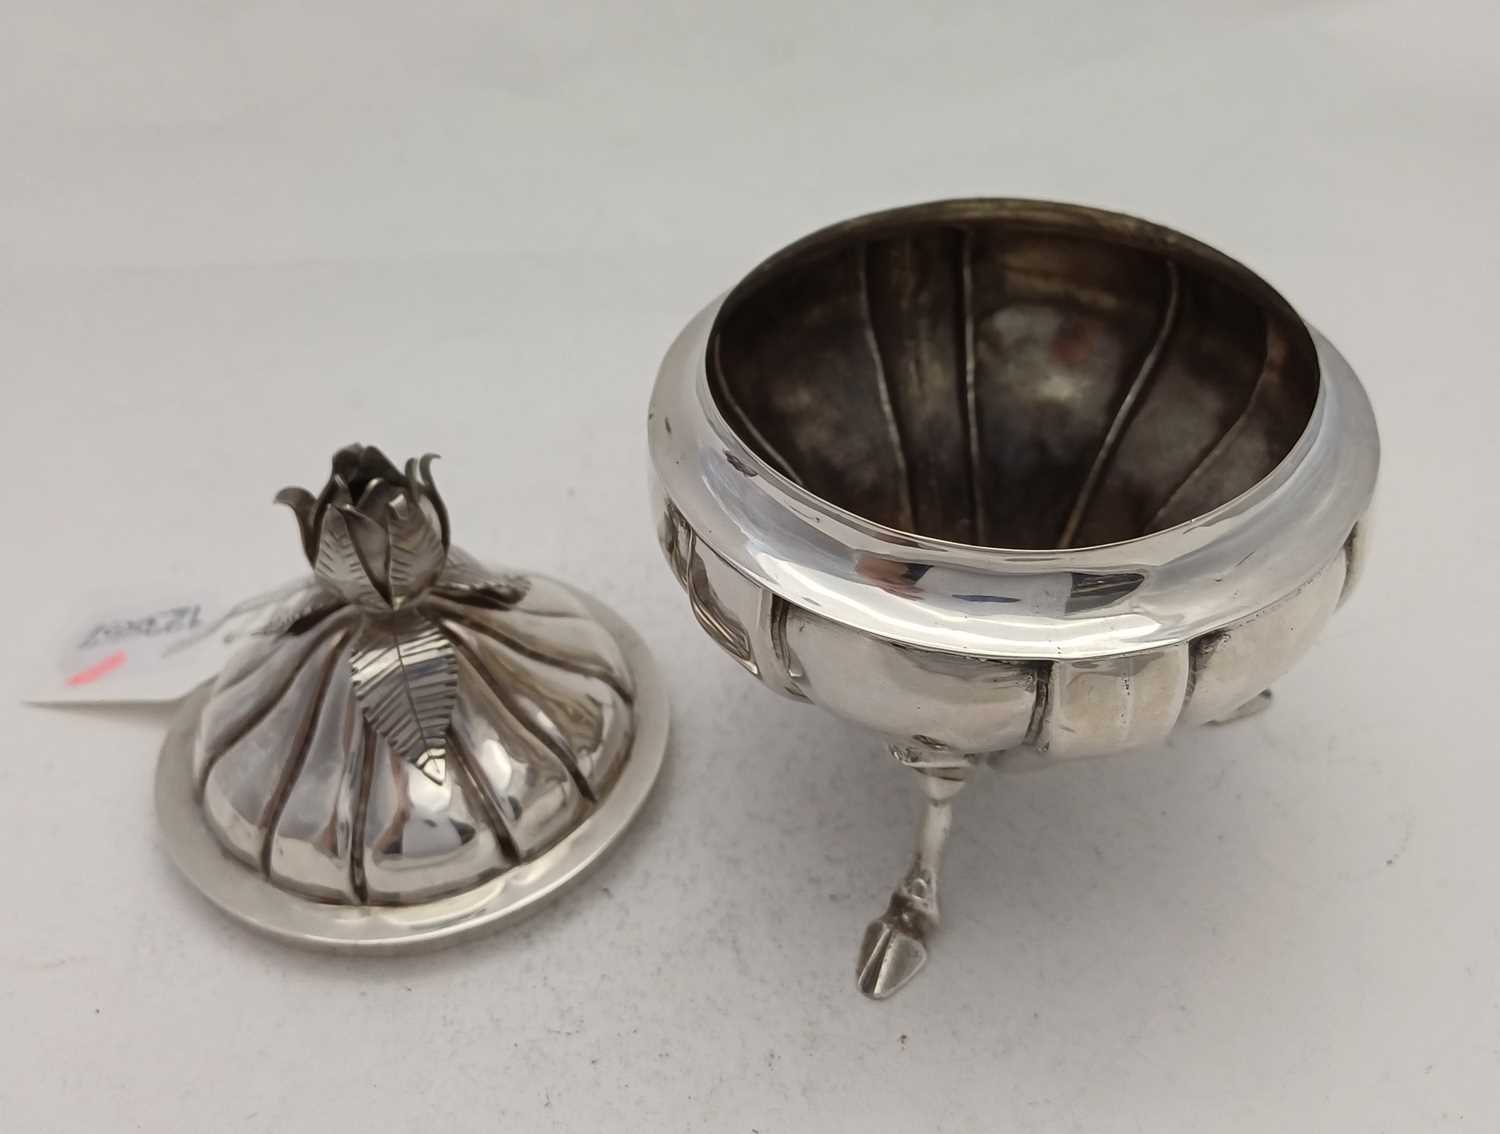 A Maltese Silver Sugar-Bowl and Cover, Maker's Mark Indistinct, 20th Century - Image 3 of 7